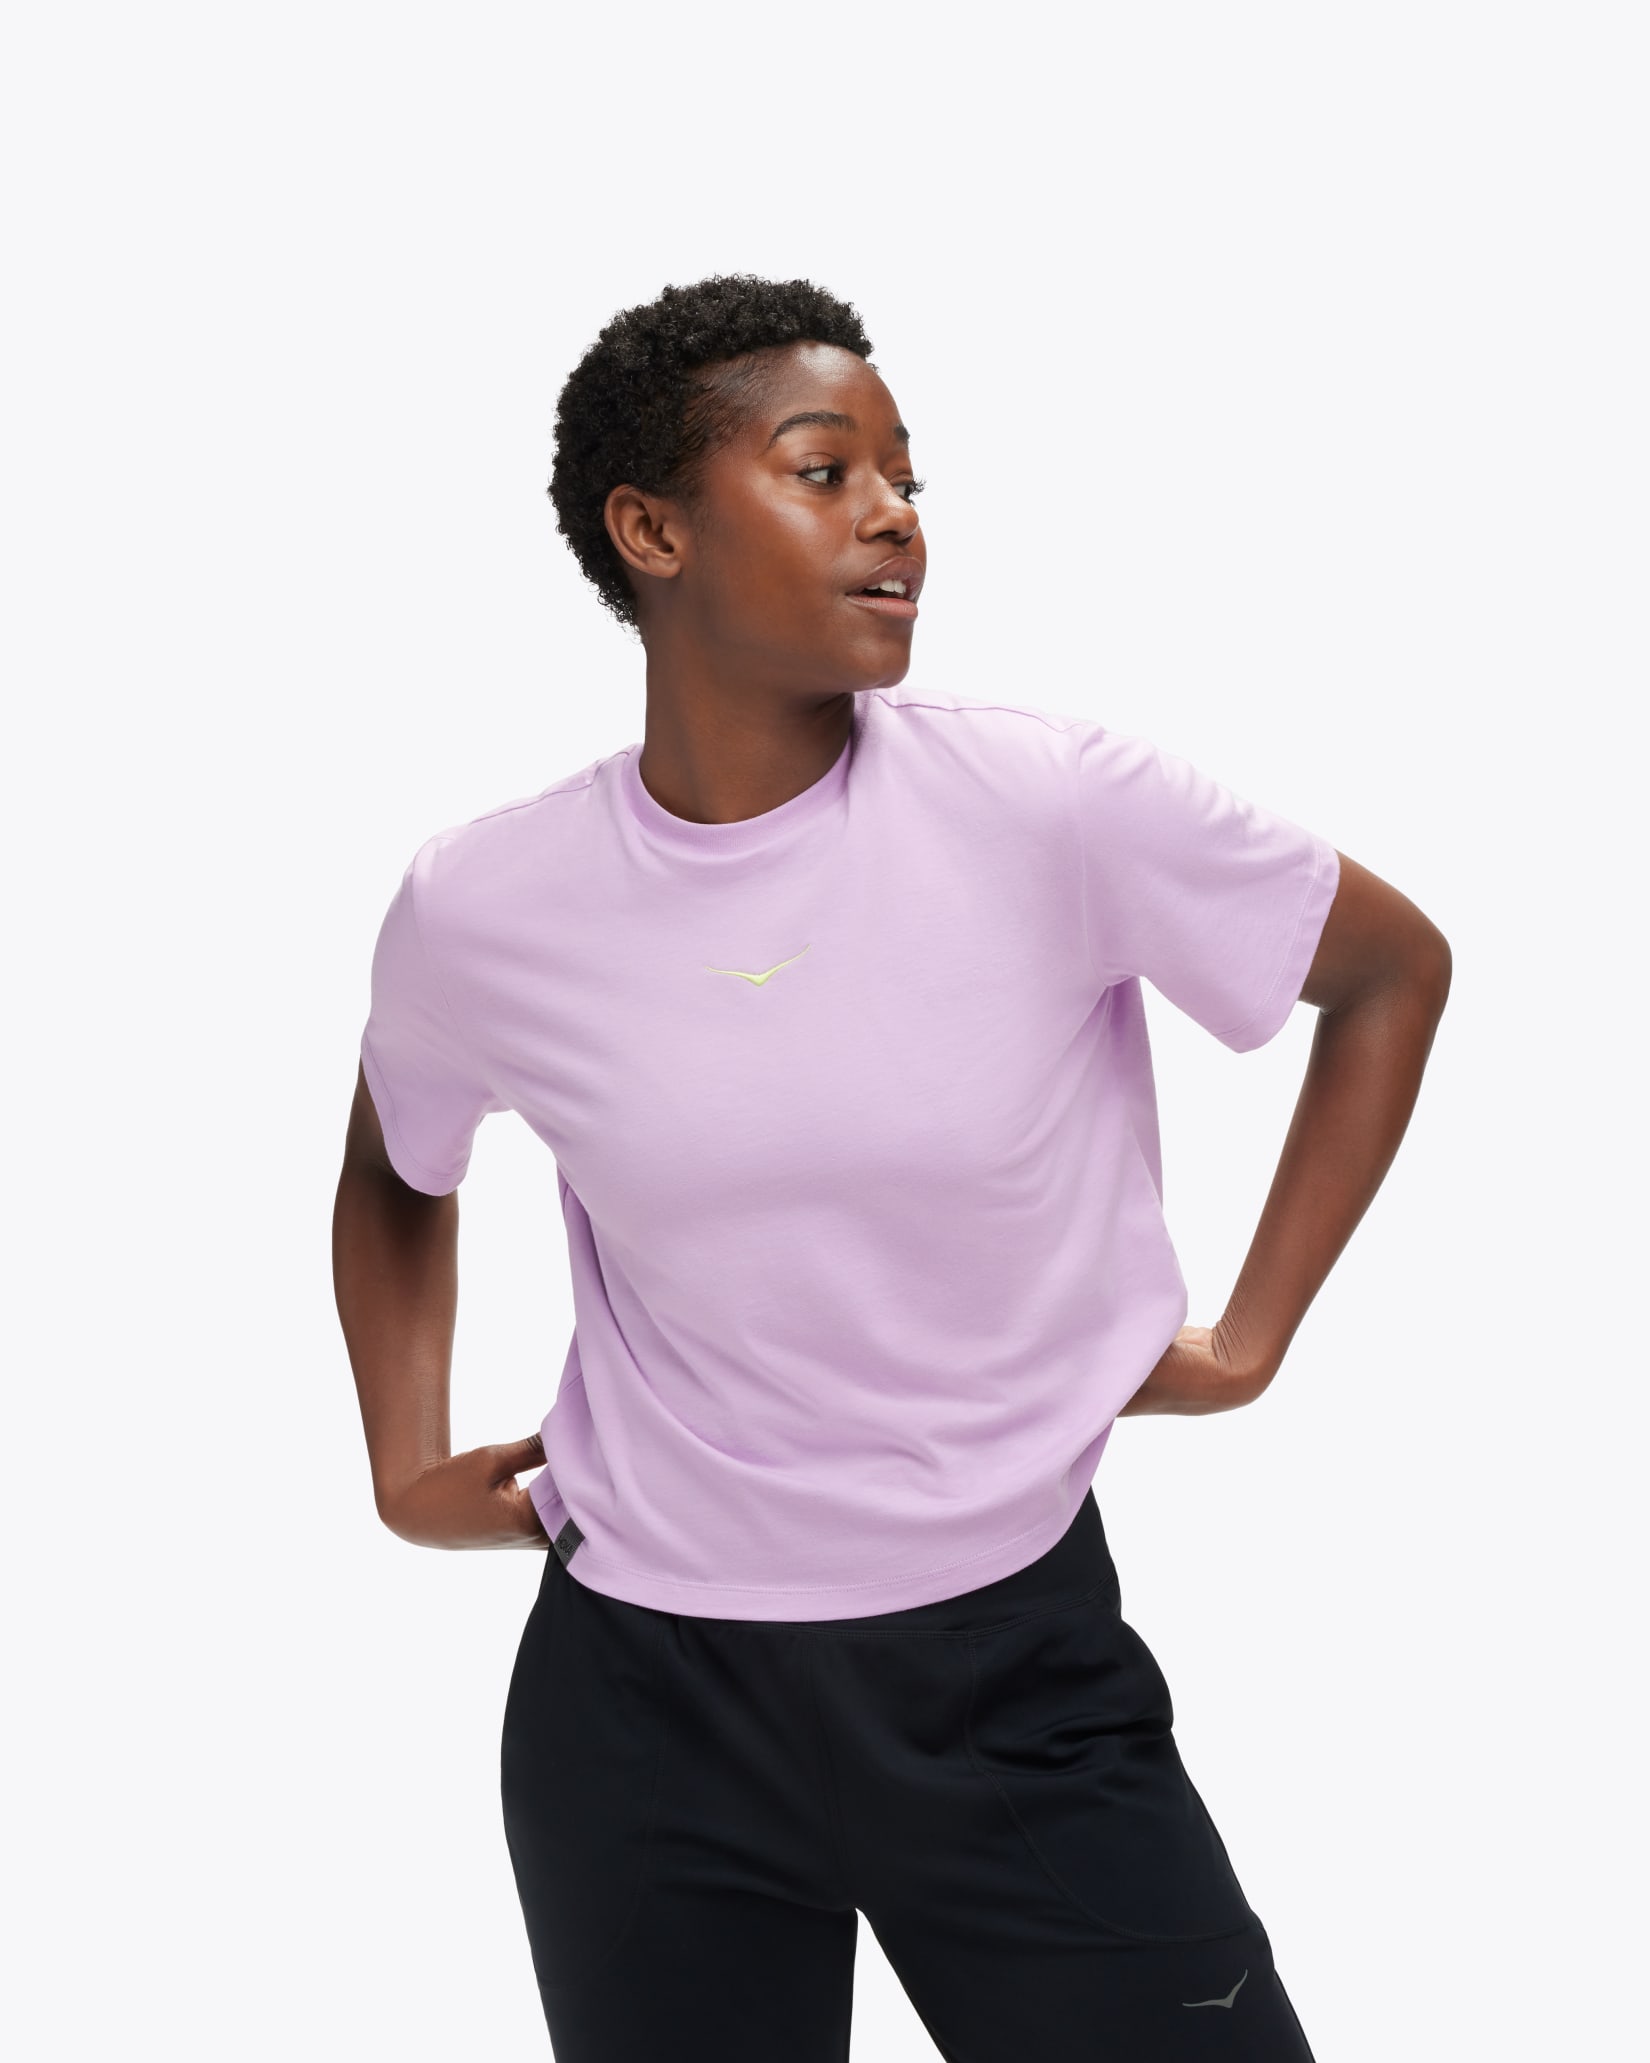 $40 Afterpay Day Sale Ends Sunday - Extended For Activewear